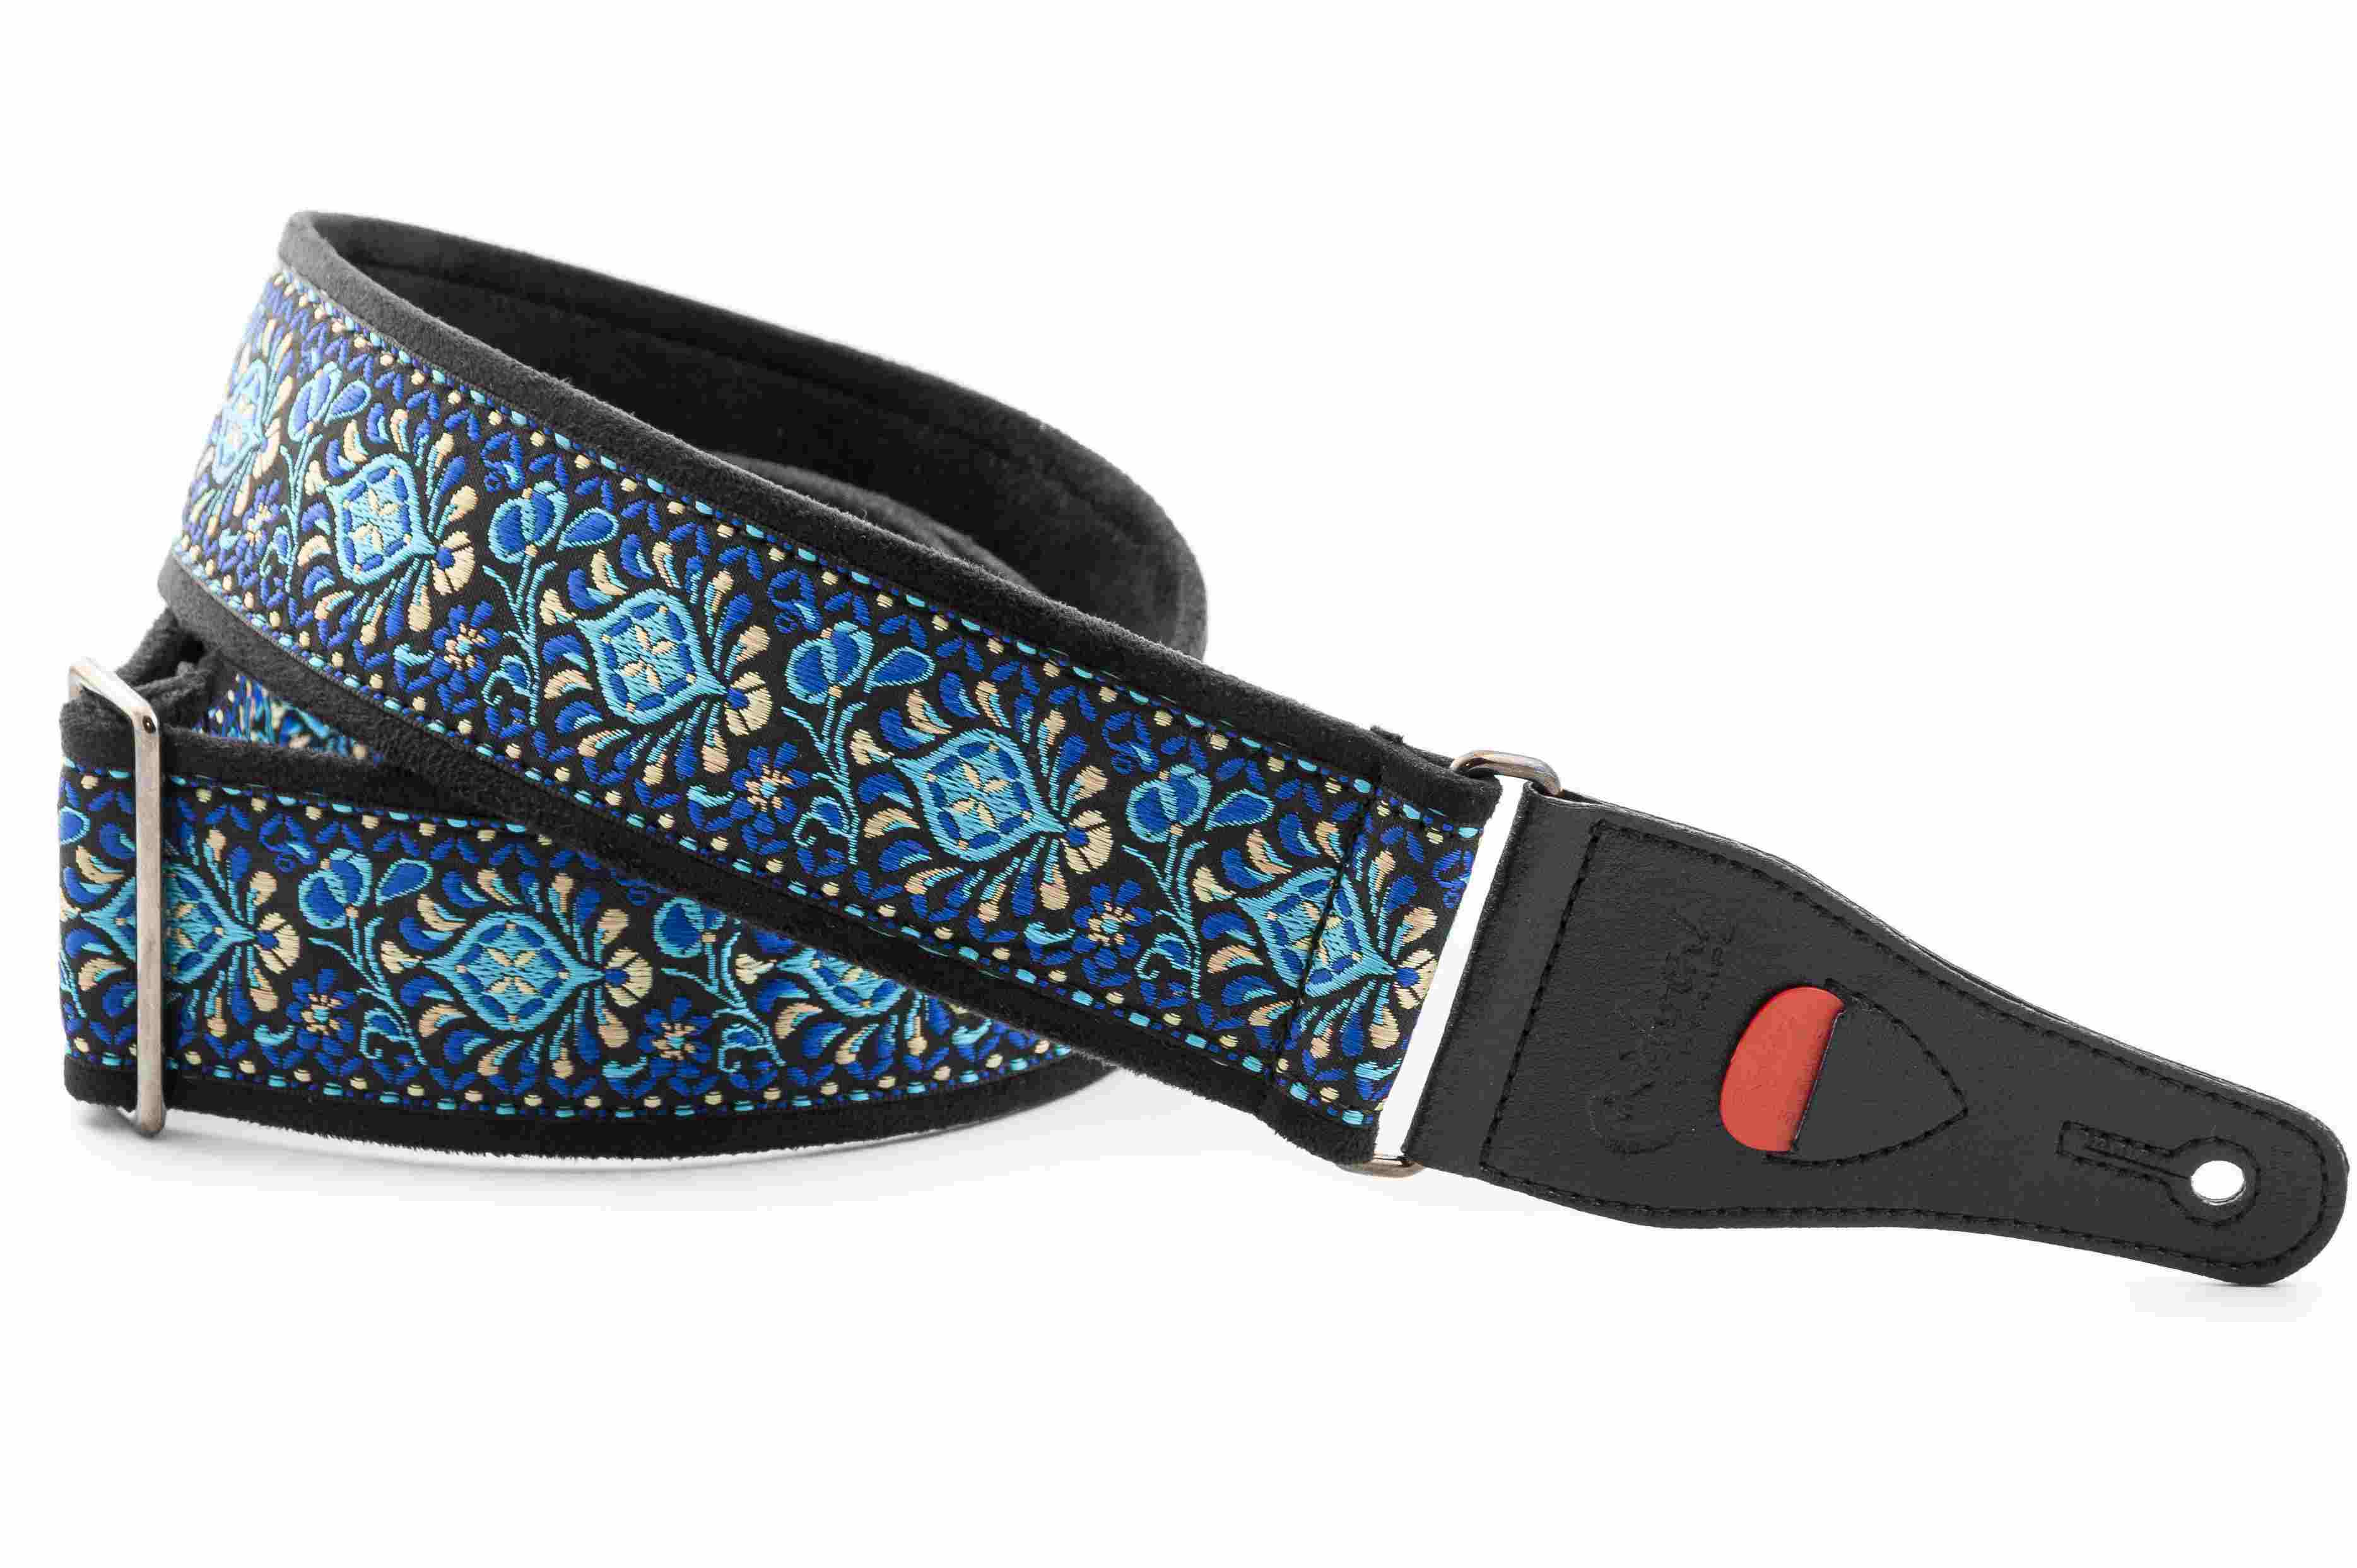 Woodstock Blue guitar and bass strap